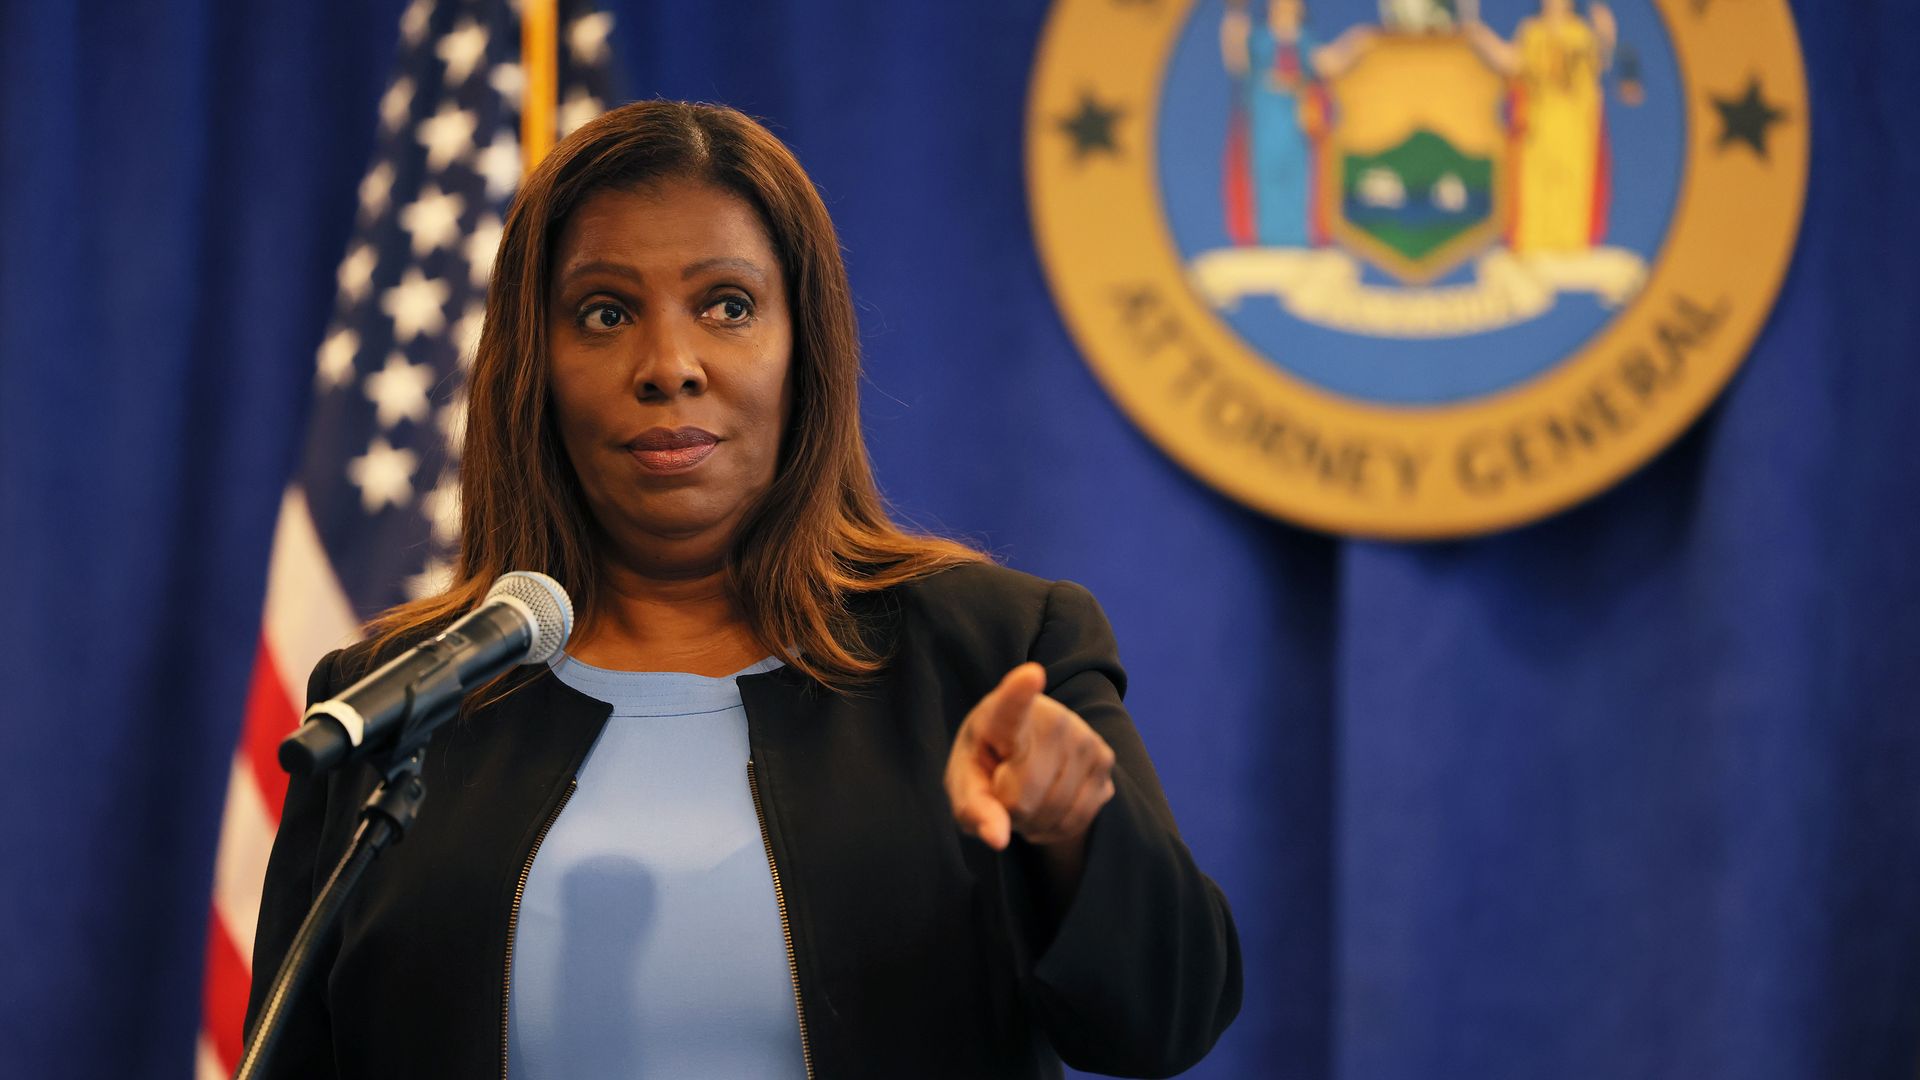 New York Attorney General Letitia James pointing during a press conference.